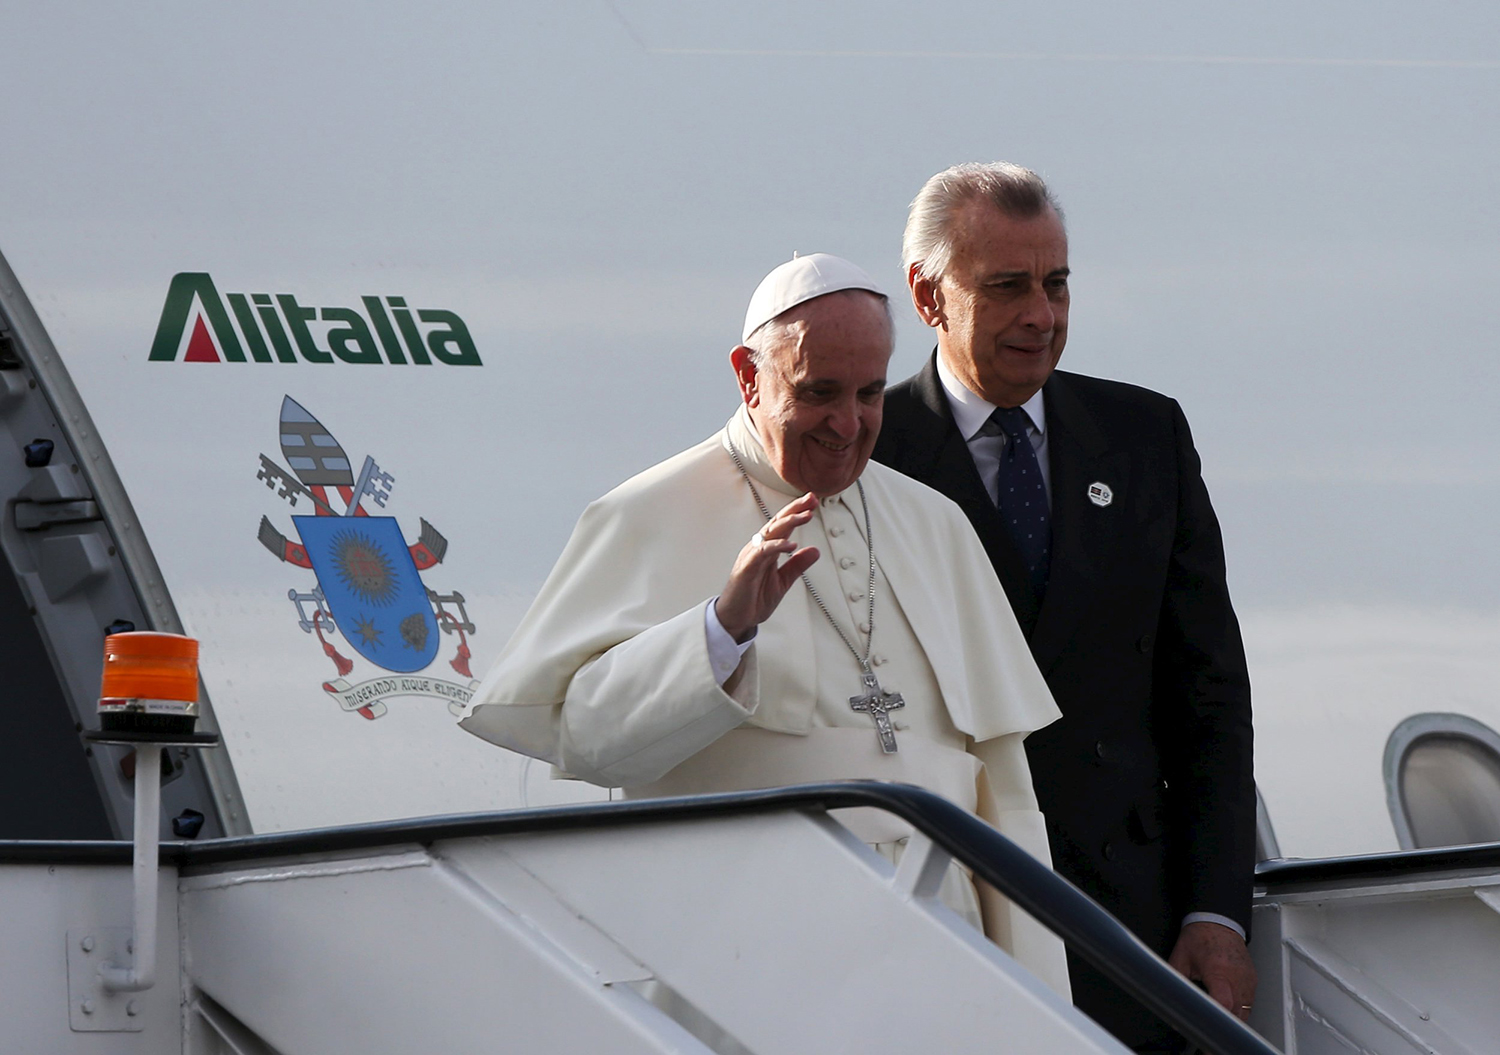 Pope Francis waves upon arrival for first papal visit to African Continent as head of the Catholic Church at the Jomo Kenyatta International Airport in Nairobi